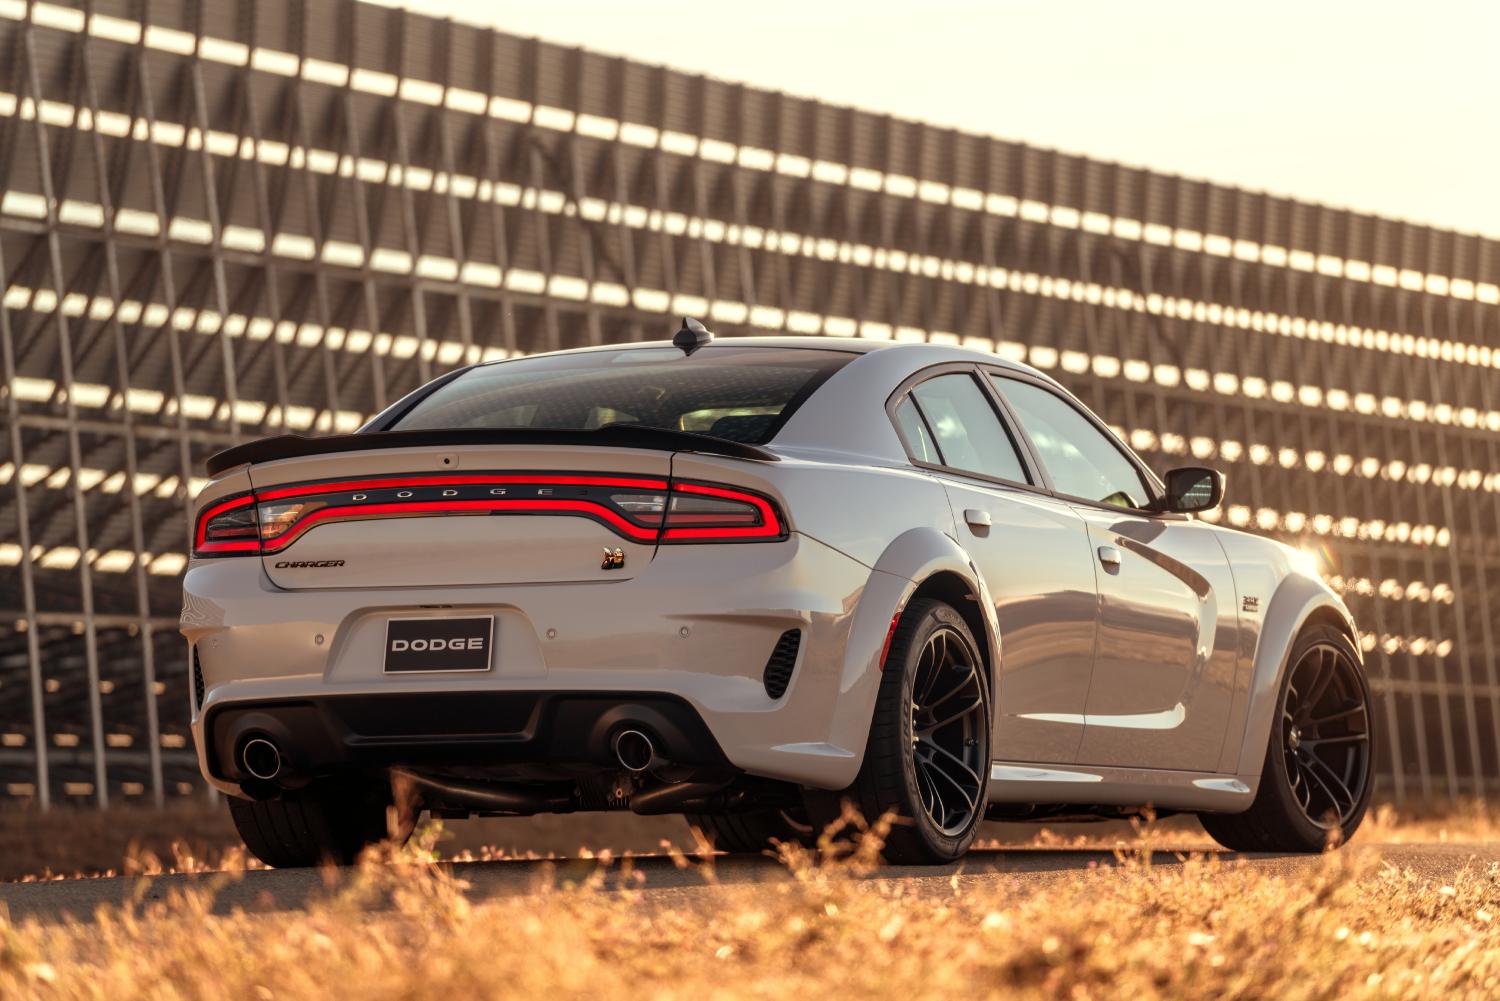 The 2021 Dodge Charger has a lot going for it.